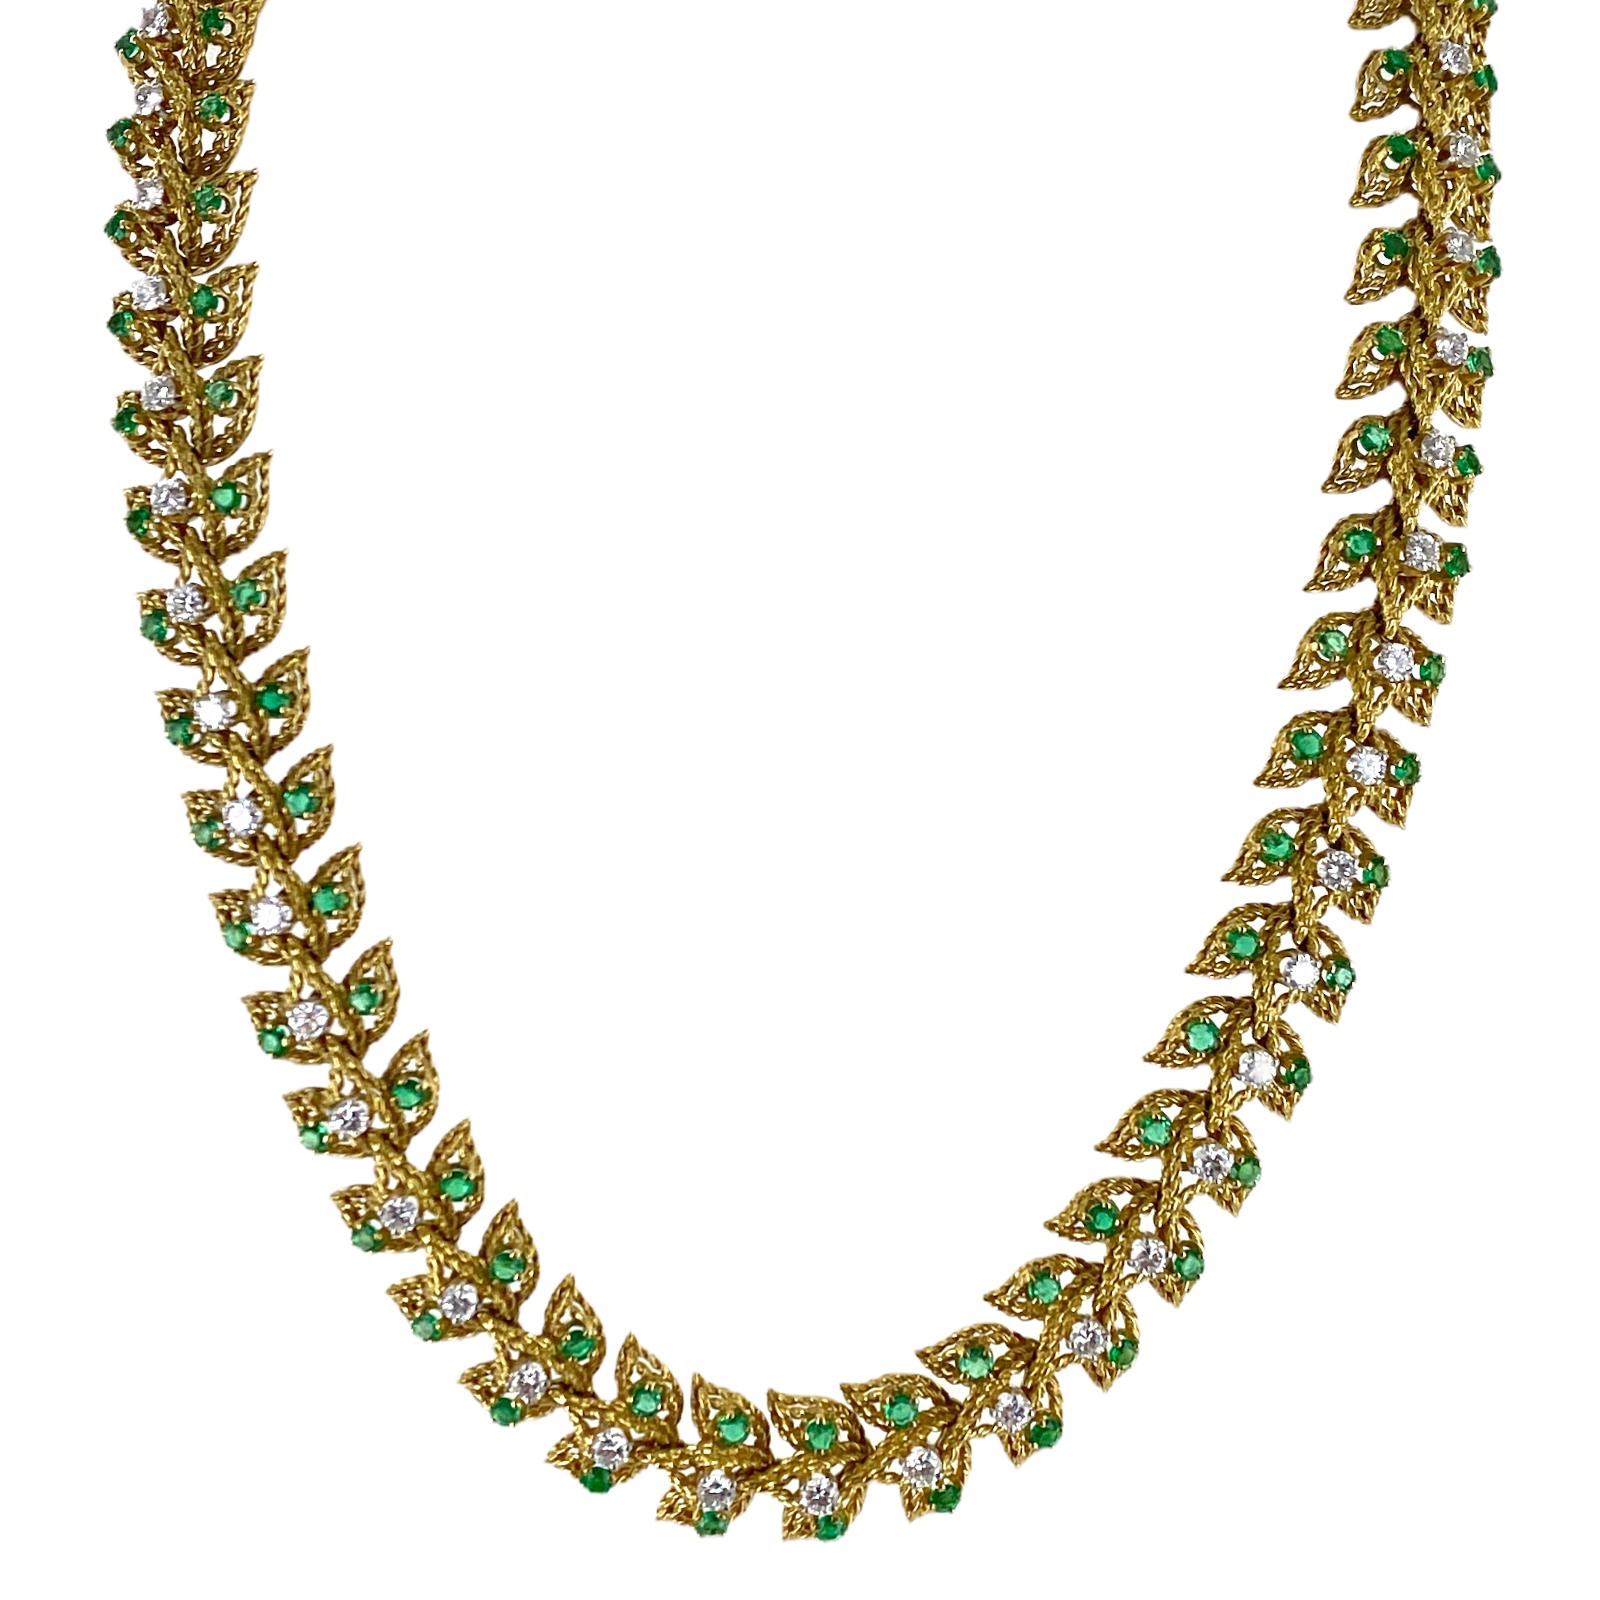 Stunning diamond emerald leaf motif necklace crafted in 18 karat yellow gold. The necklace features 47 round brilliant cut diamonds weighing approximately 4.00 carat total weight and graded F-H color and VS clarity. The necklace also is set with 94